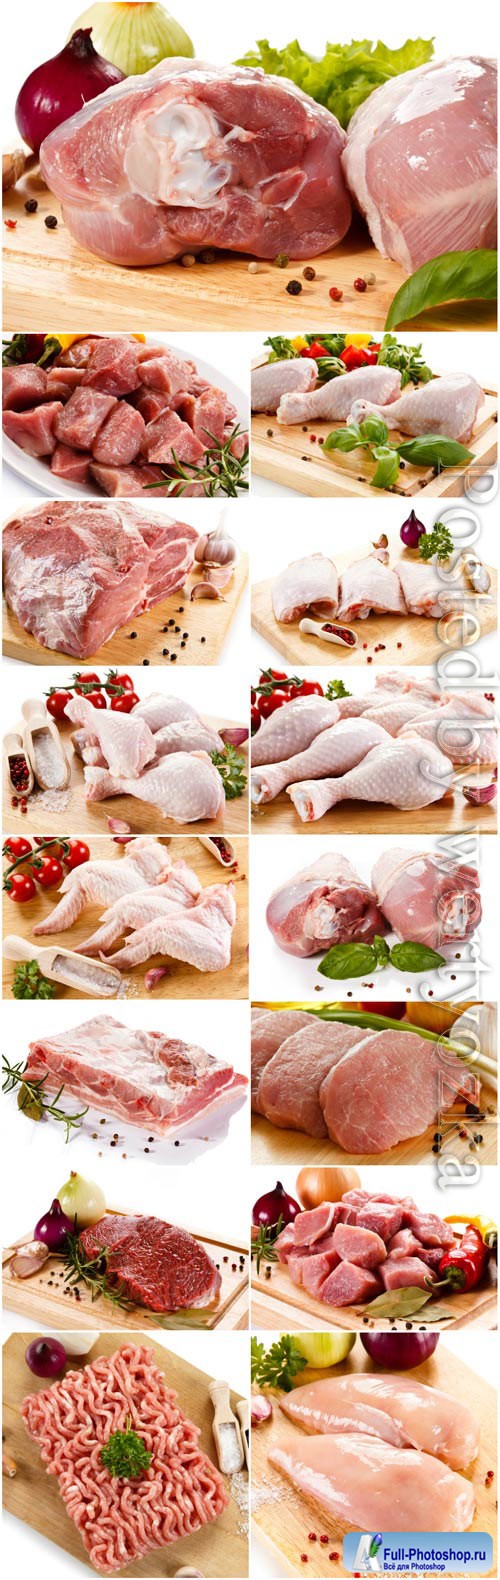 Fresh pork and chicken meat stock photo